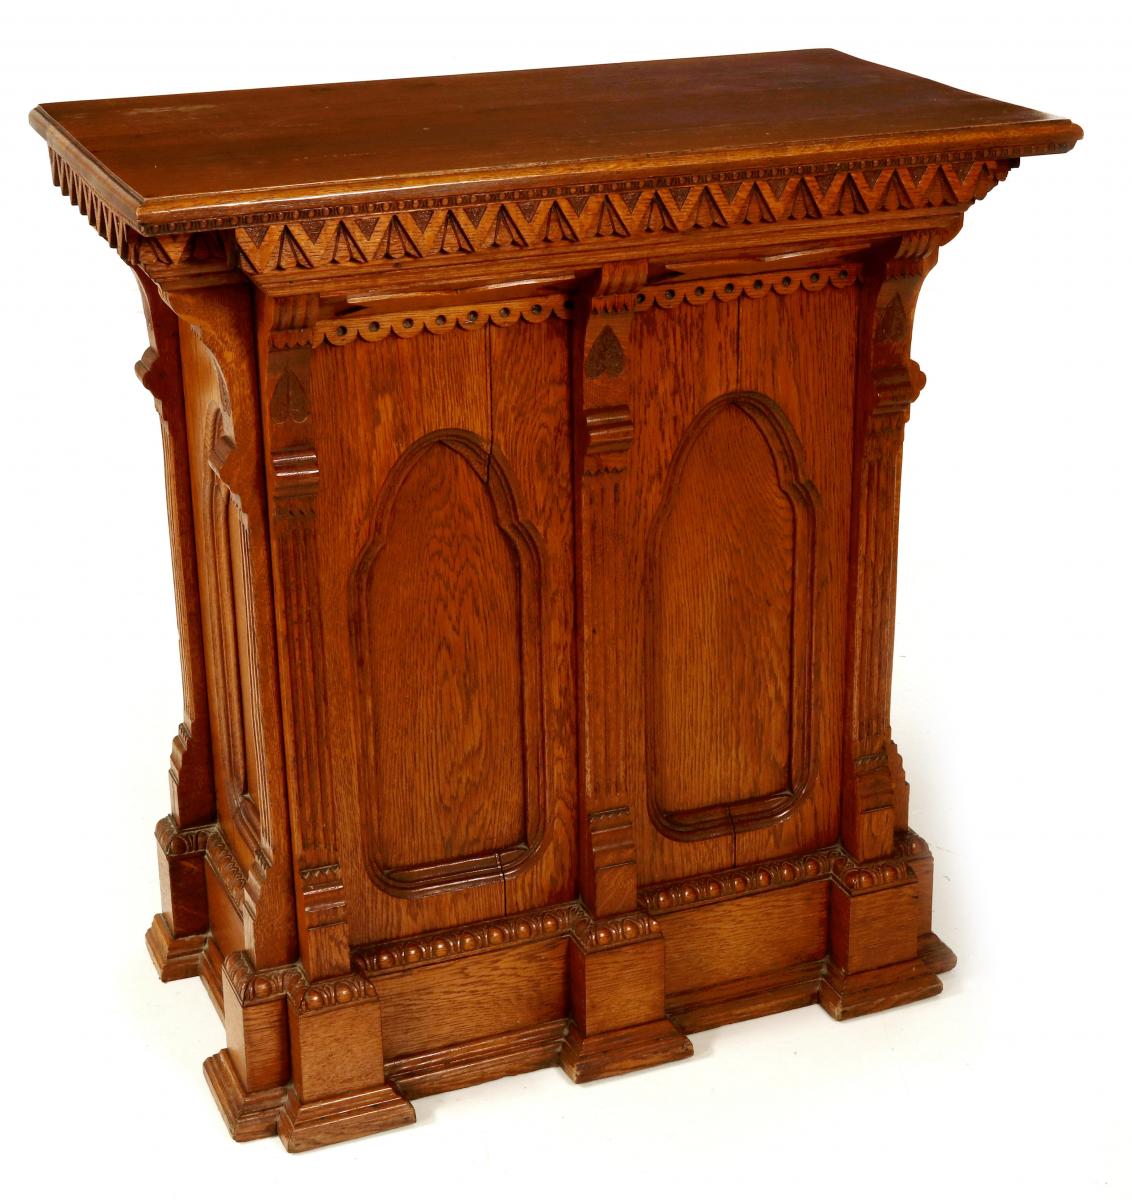 A LATE 19TH C AMERICAN OAK GOTHIC INFLUENCE LECTERN